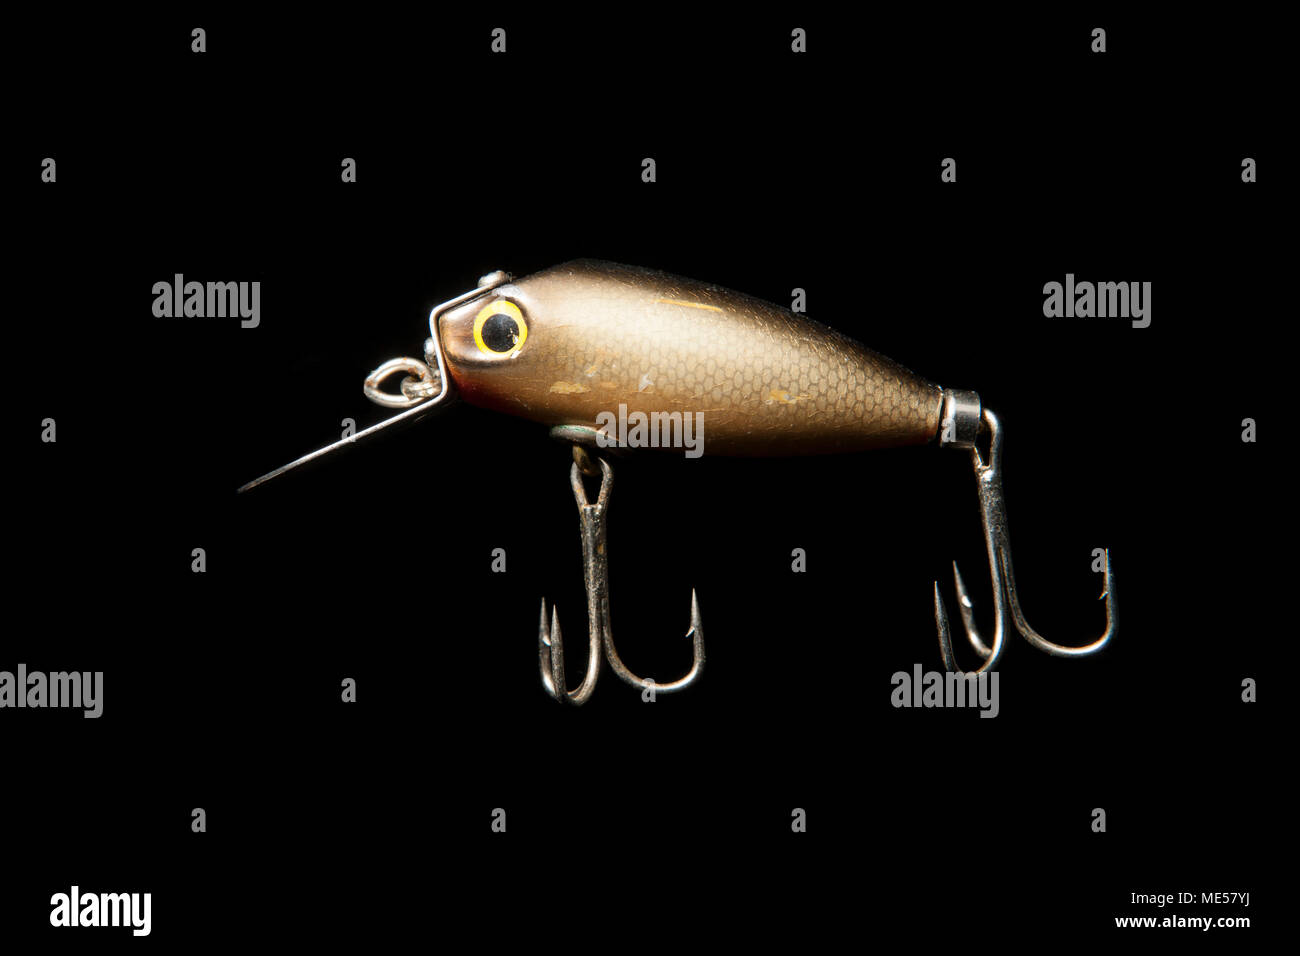 A vintage fishing lure also known as a plug from a fishing tackle collection Dorset England UK GB Stock Photo